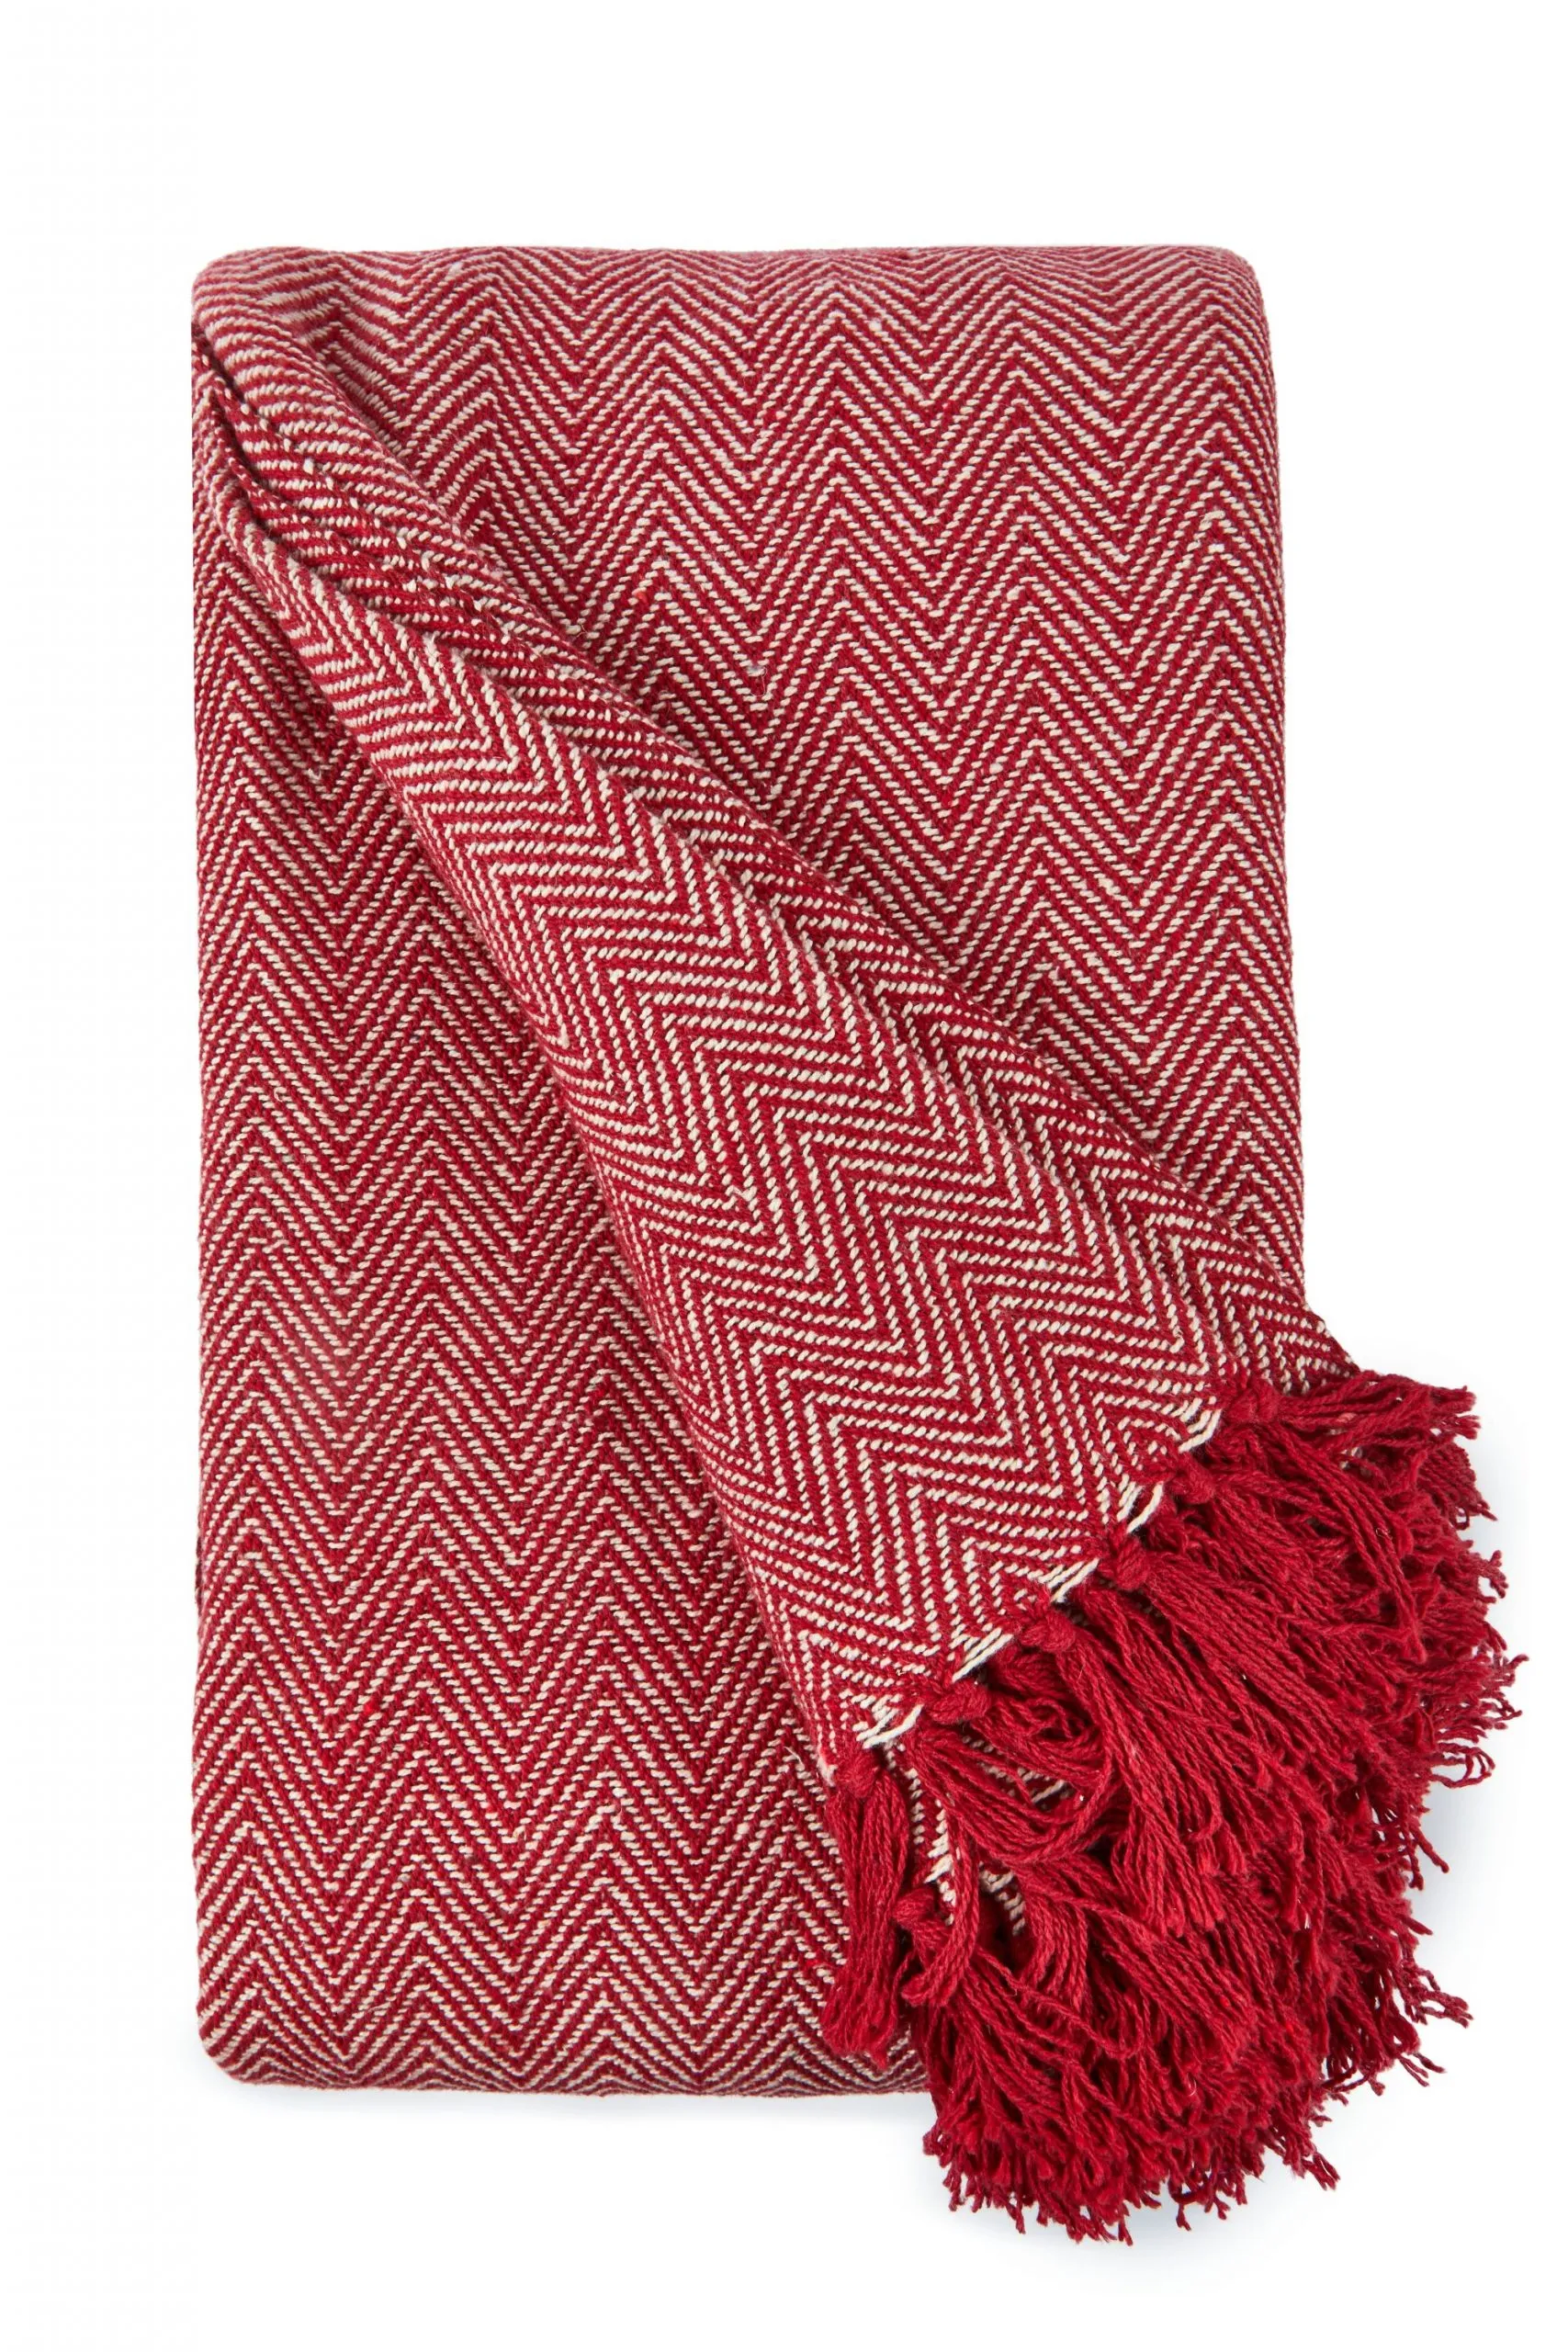 harringbone recycled red folded cotton blanket